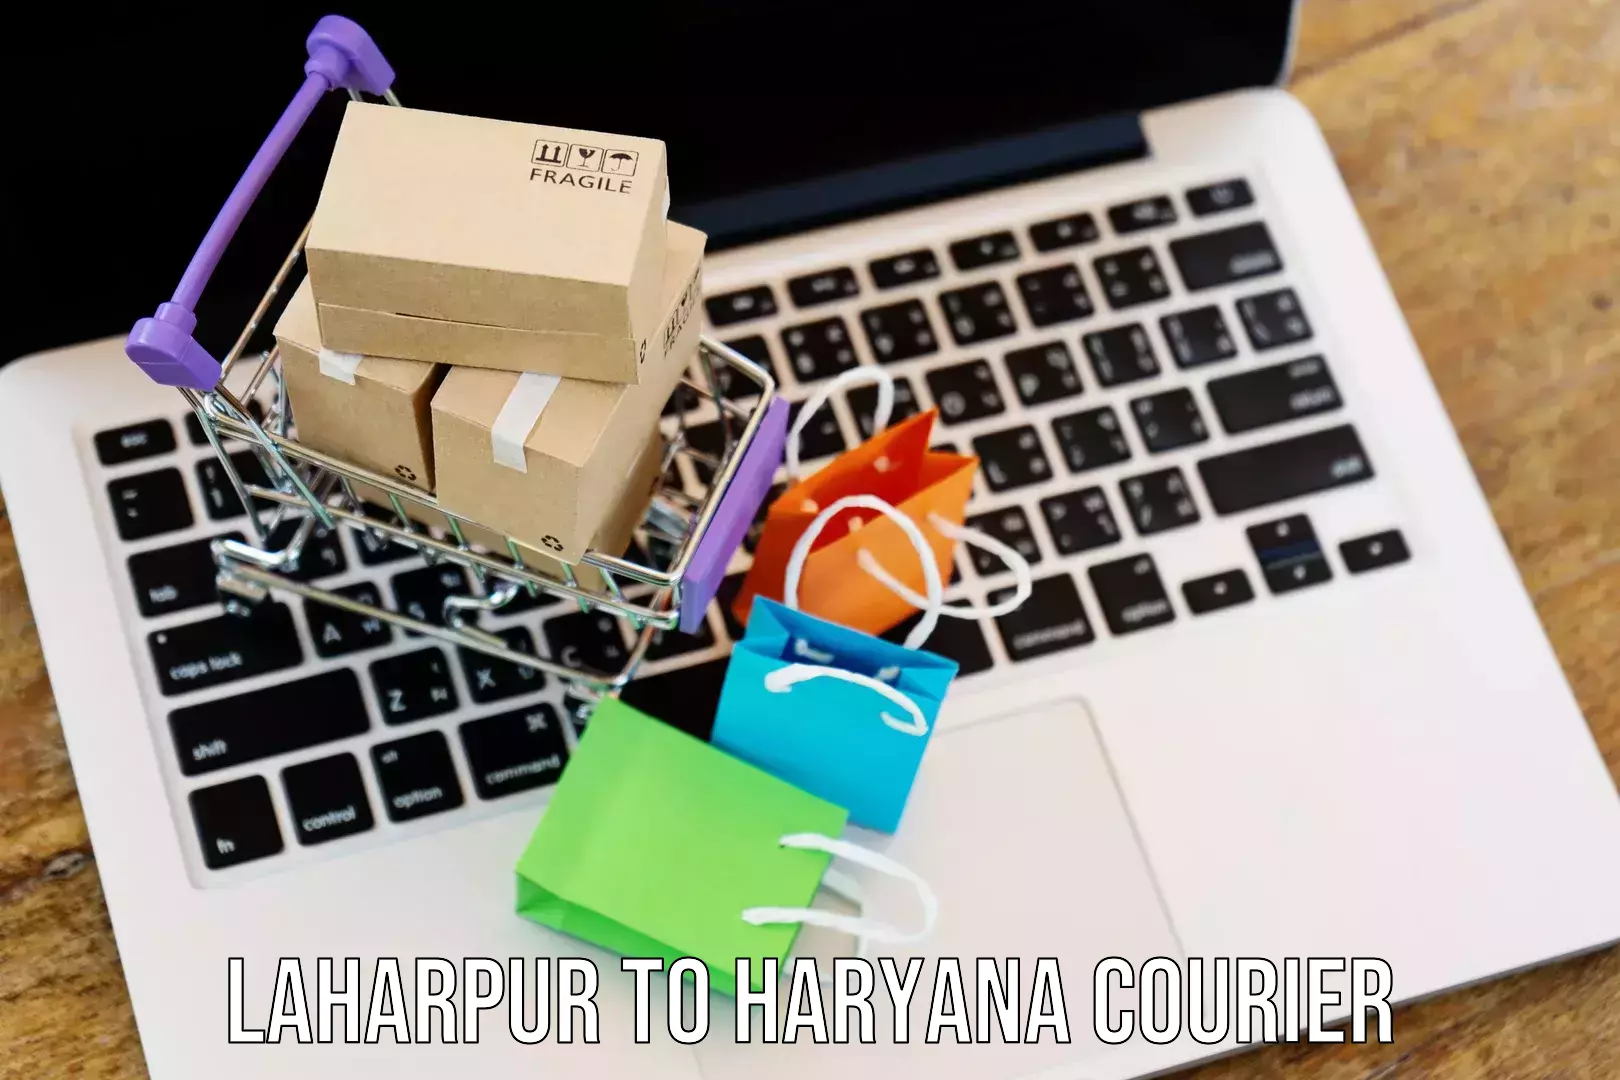 Courier service innovation in Laharpur to Haryana